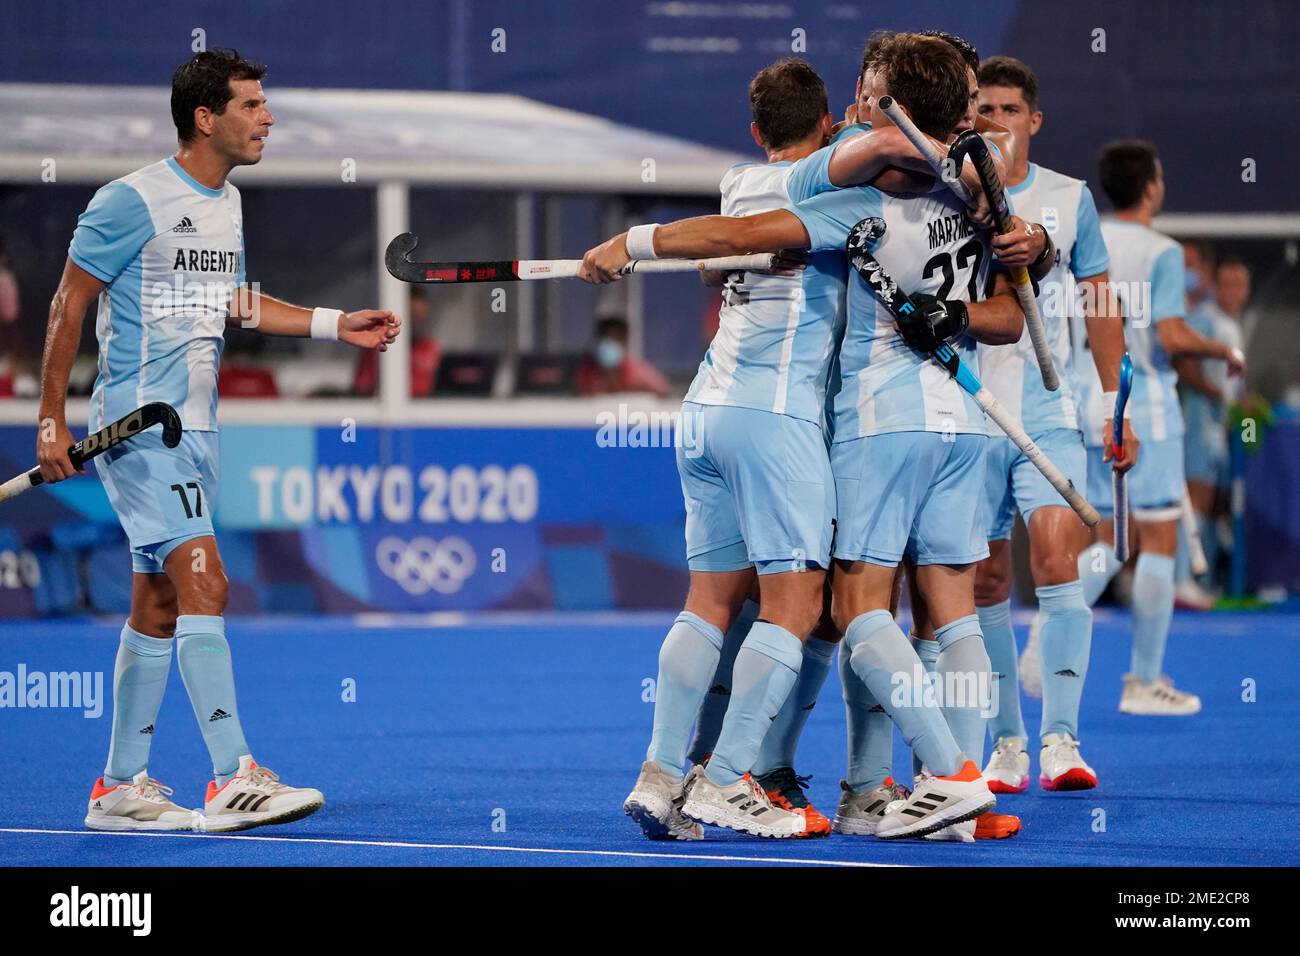 Team Argentina celebrates after New Zealands Dane Lett scores on his own goal during a mens field hockey match at the 2020 Summer Olympics, Friday, July 30, 2021, in Tokyo, Japan